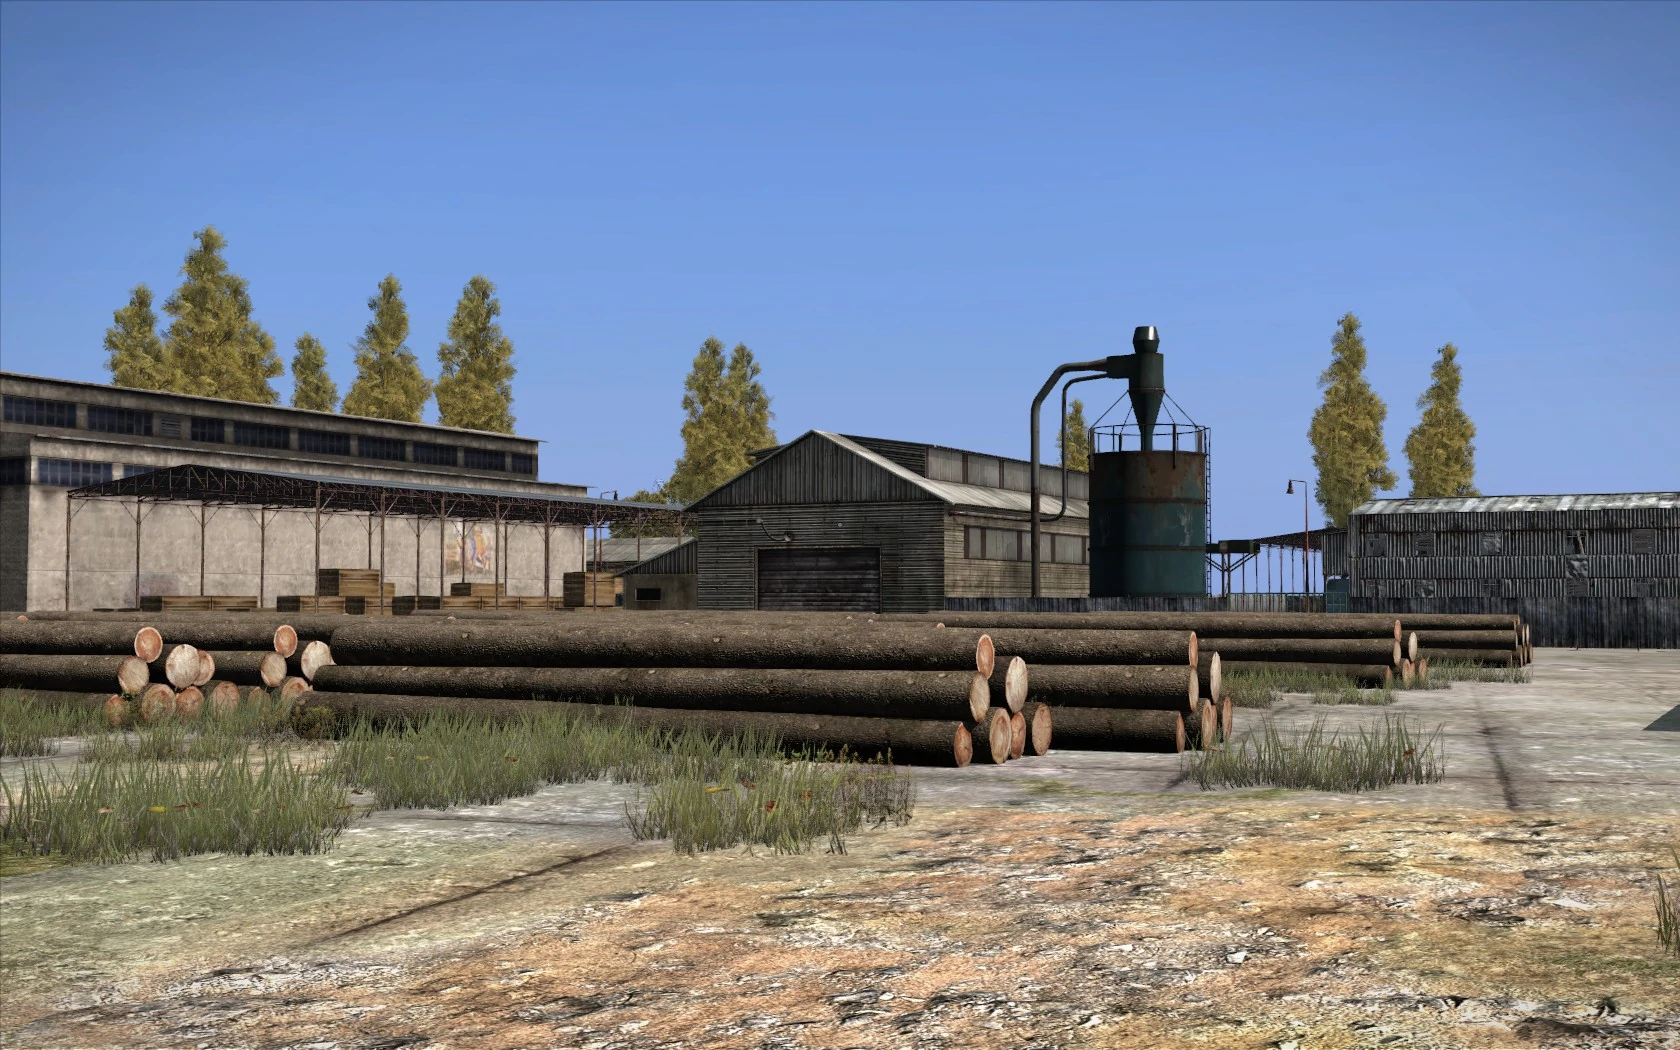 A lumber mill in DayZ